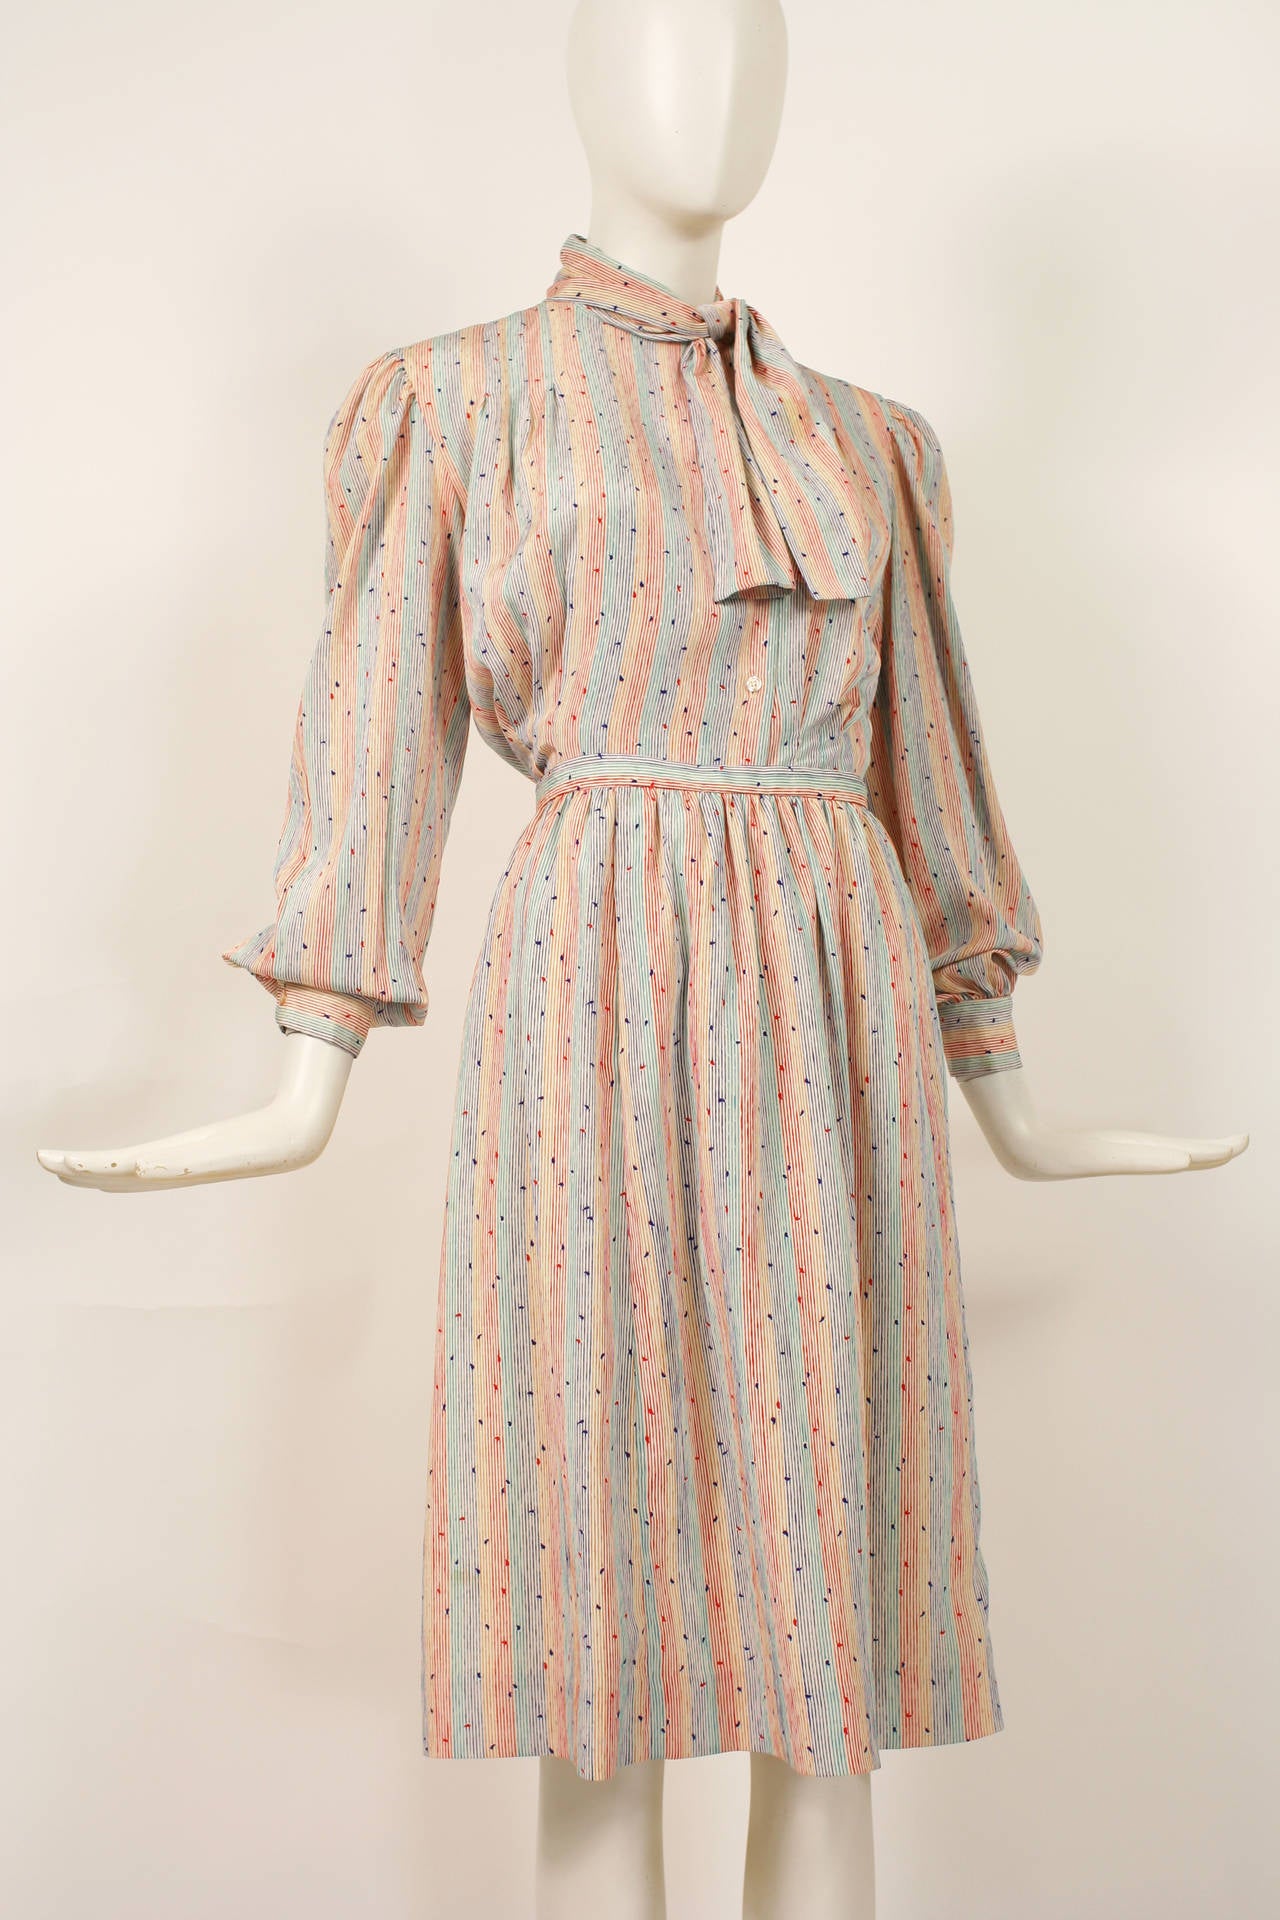 1970s silk Halston blouse and skirt ensemble. Multi colored pattern with white, blue, green,pink and red stripes. Bow at neck. Cuffed sleeves. Excellent condition. Size s-m.

Skirt
Waist- 25-26